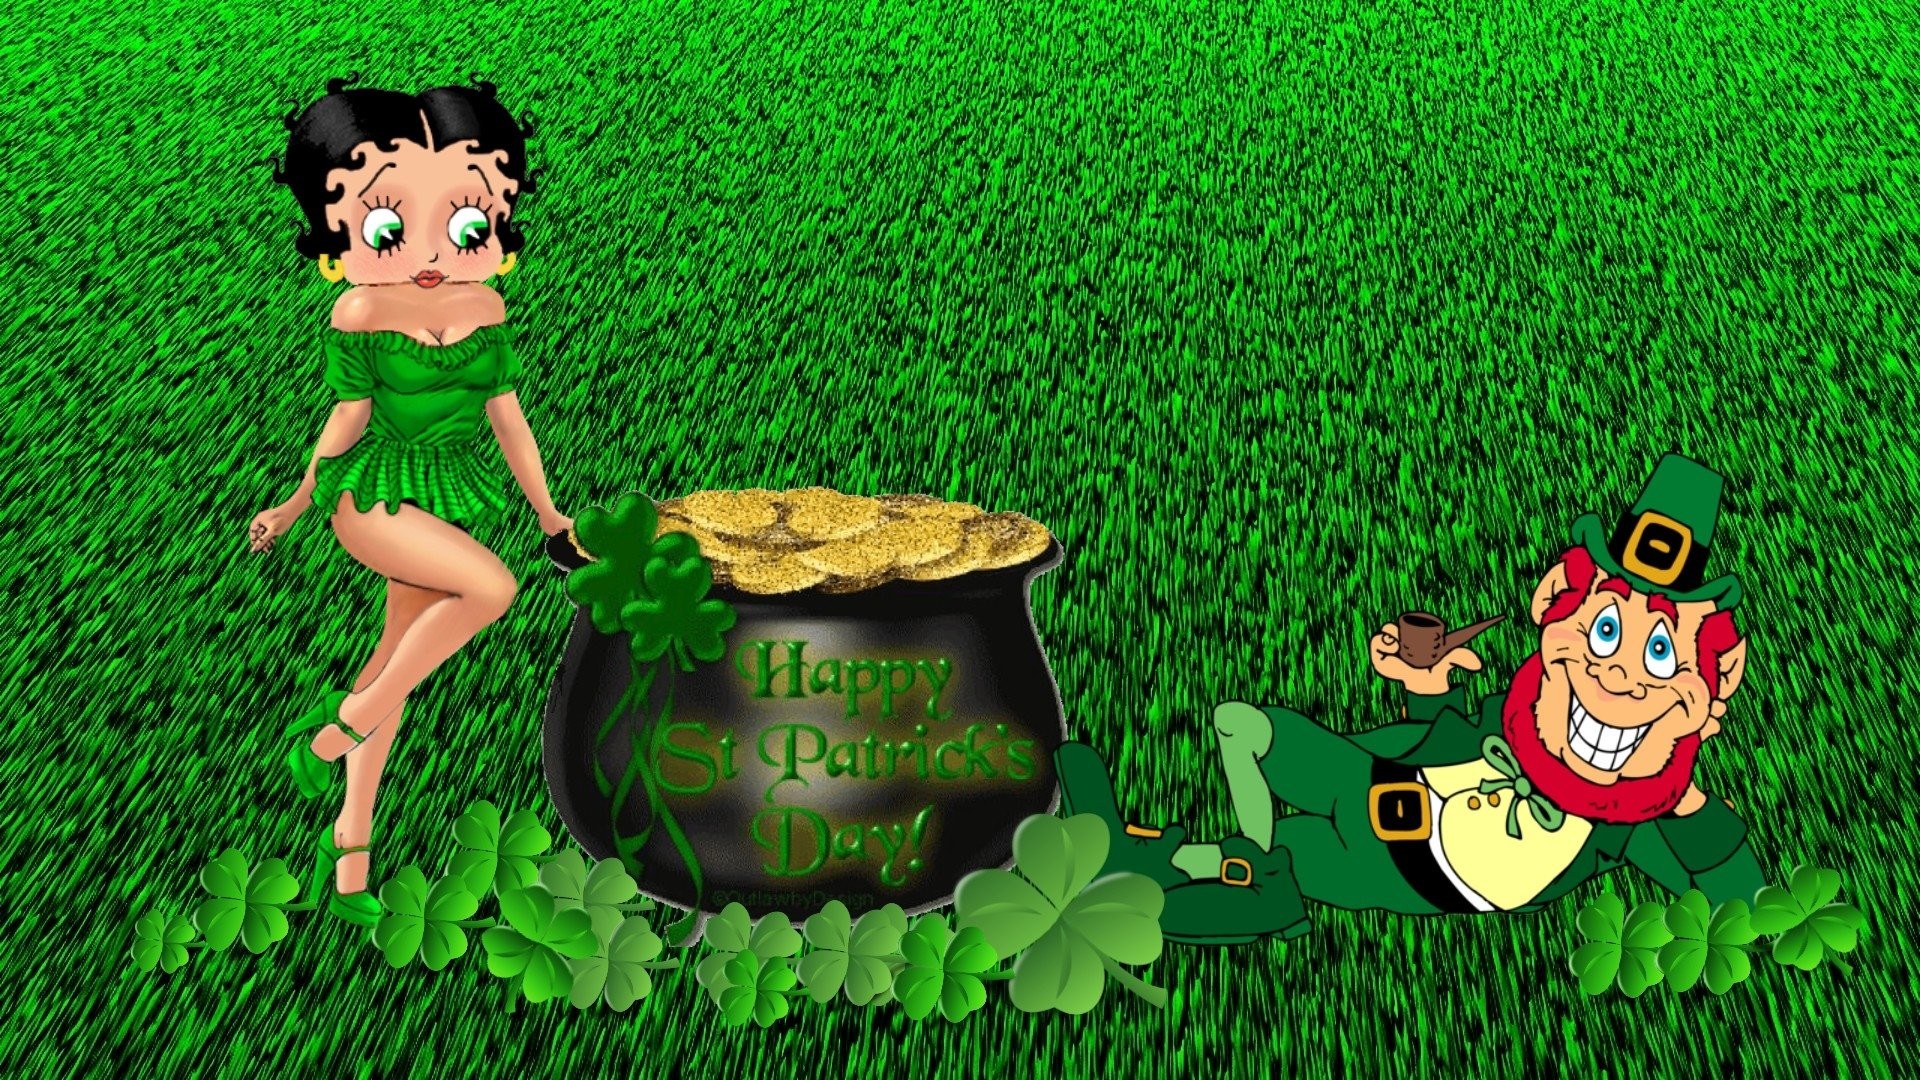 1920x1080 HD Wallpaper | Background ID:226094.  Holiday St. Patrick's Day.  12 Like. Favorite